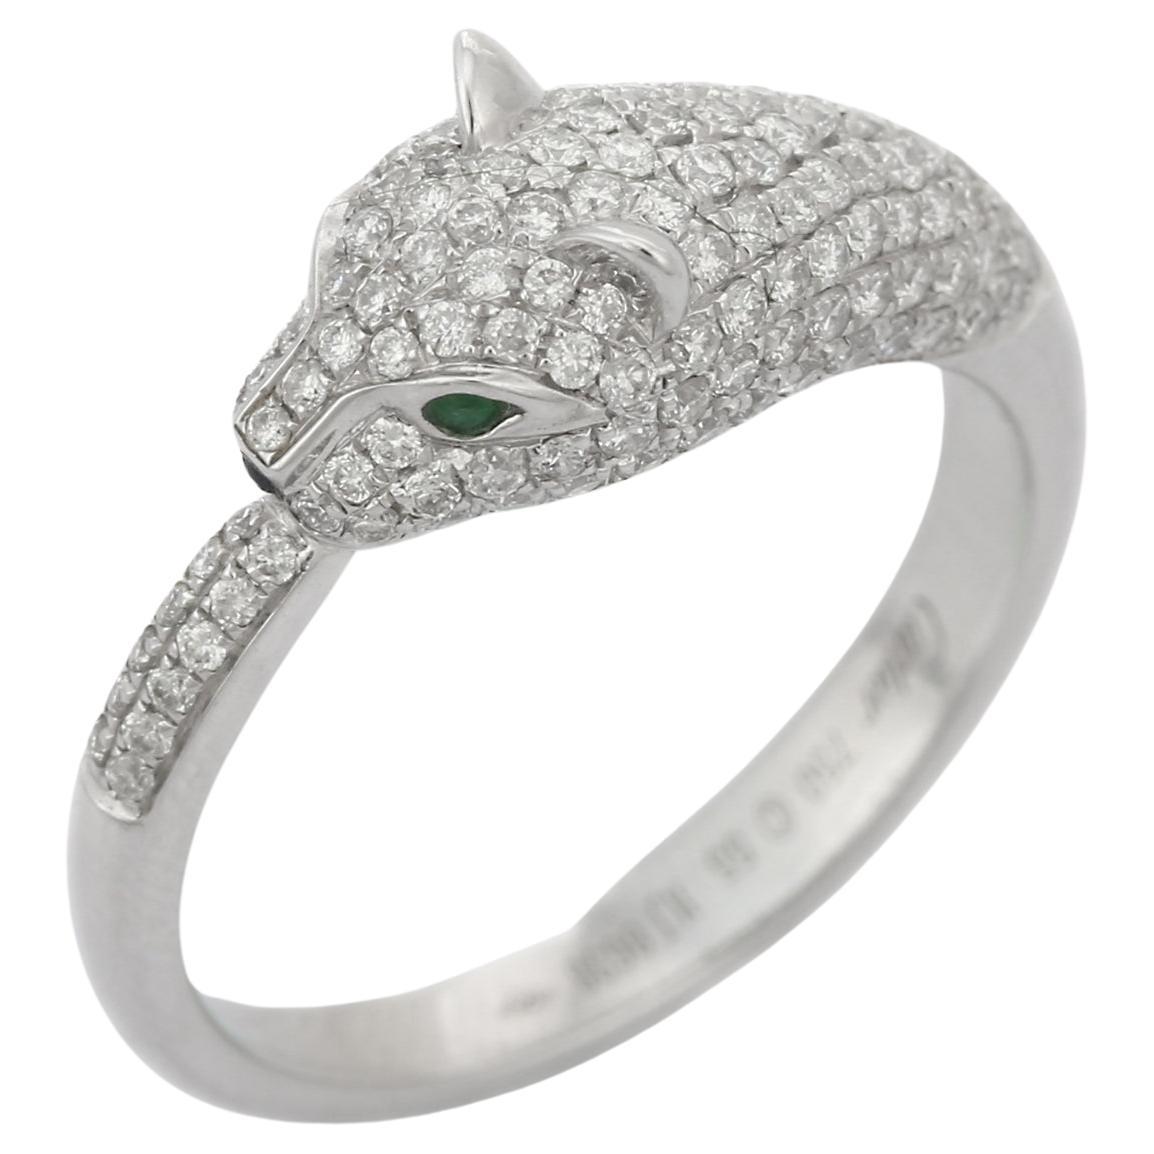 18K White Gold Panther Animal Cocktail Ring with Emerald, Sapphire and Diamonds